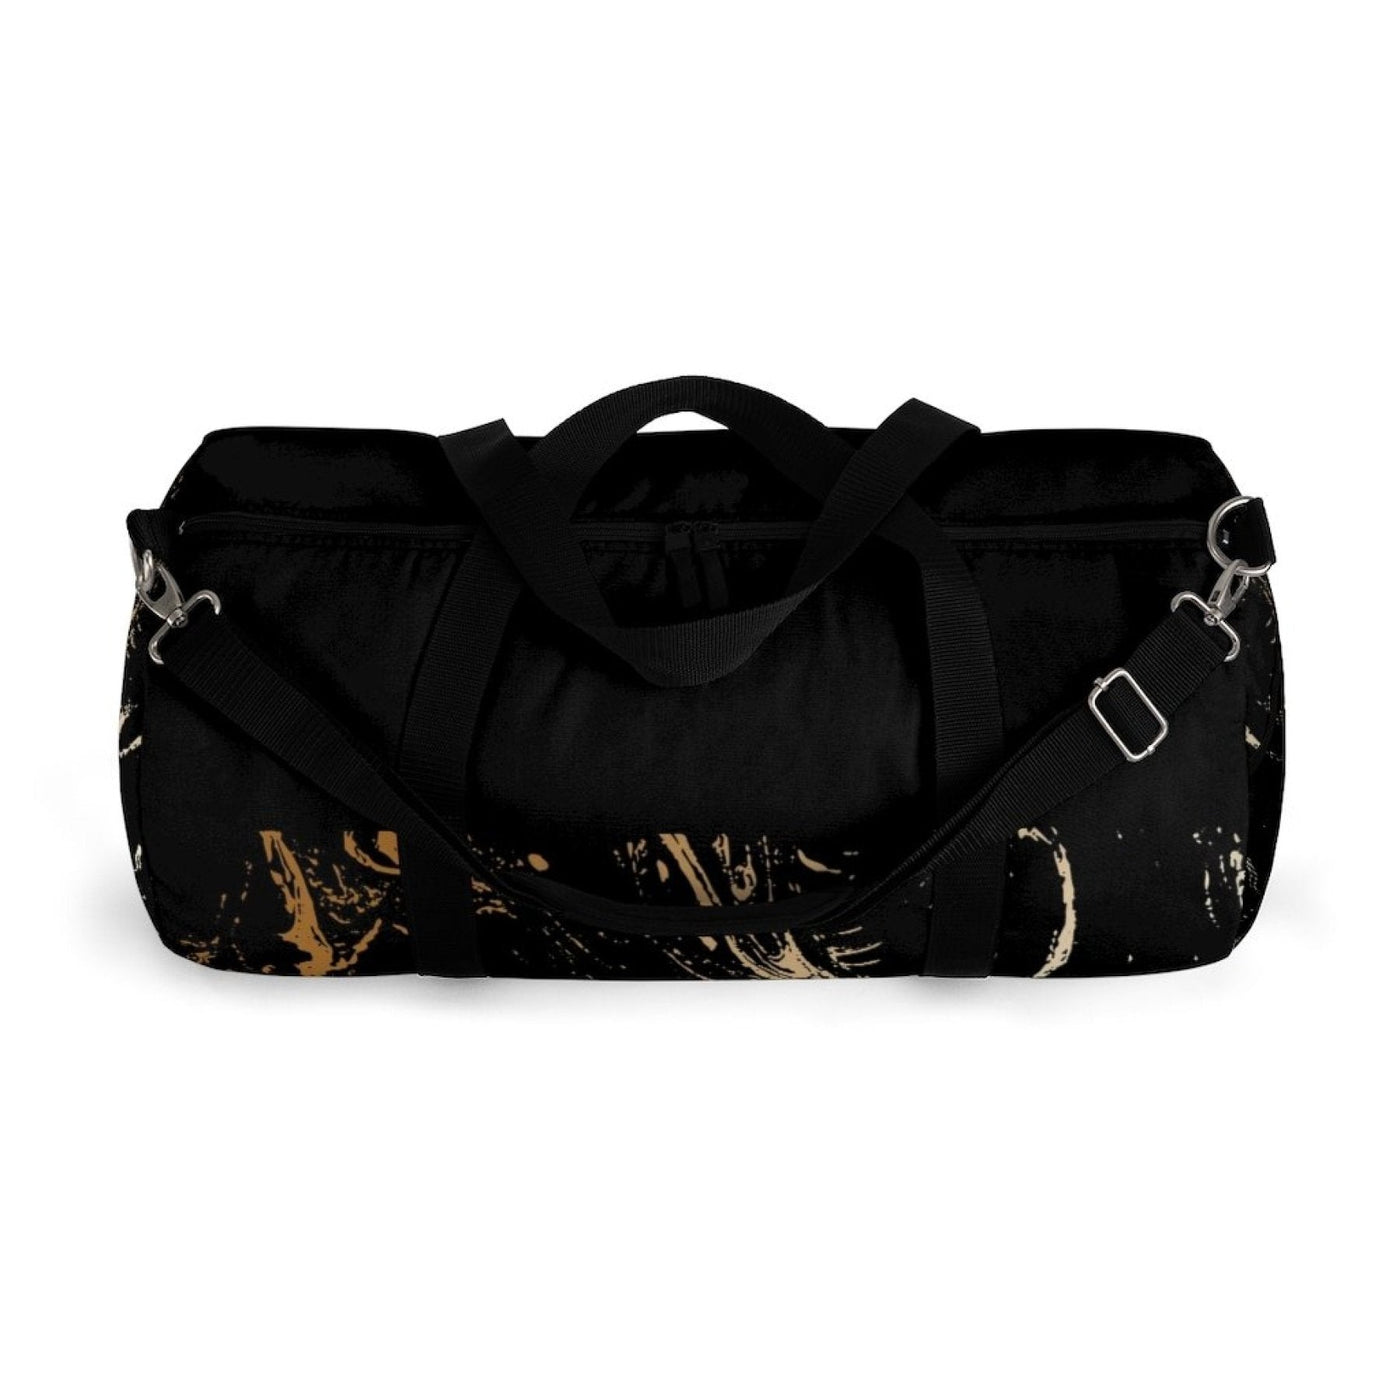 Duffel Bag Carry On Luggage Black And Gold - Bags | Duffel Bags